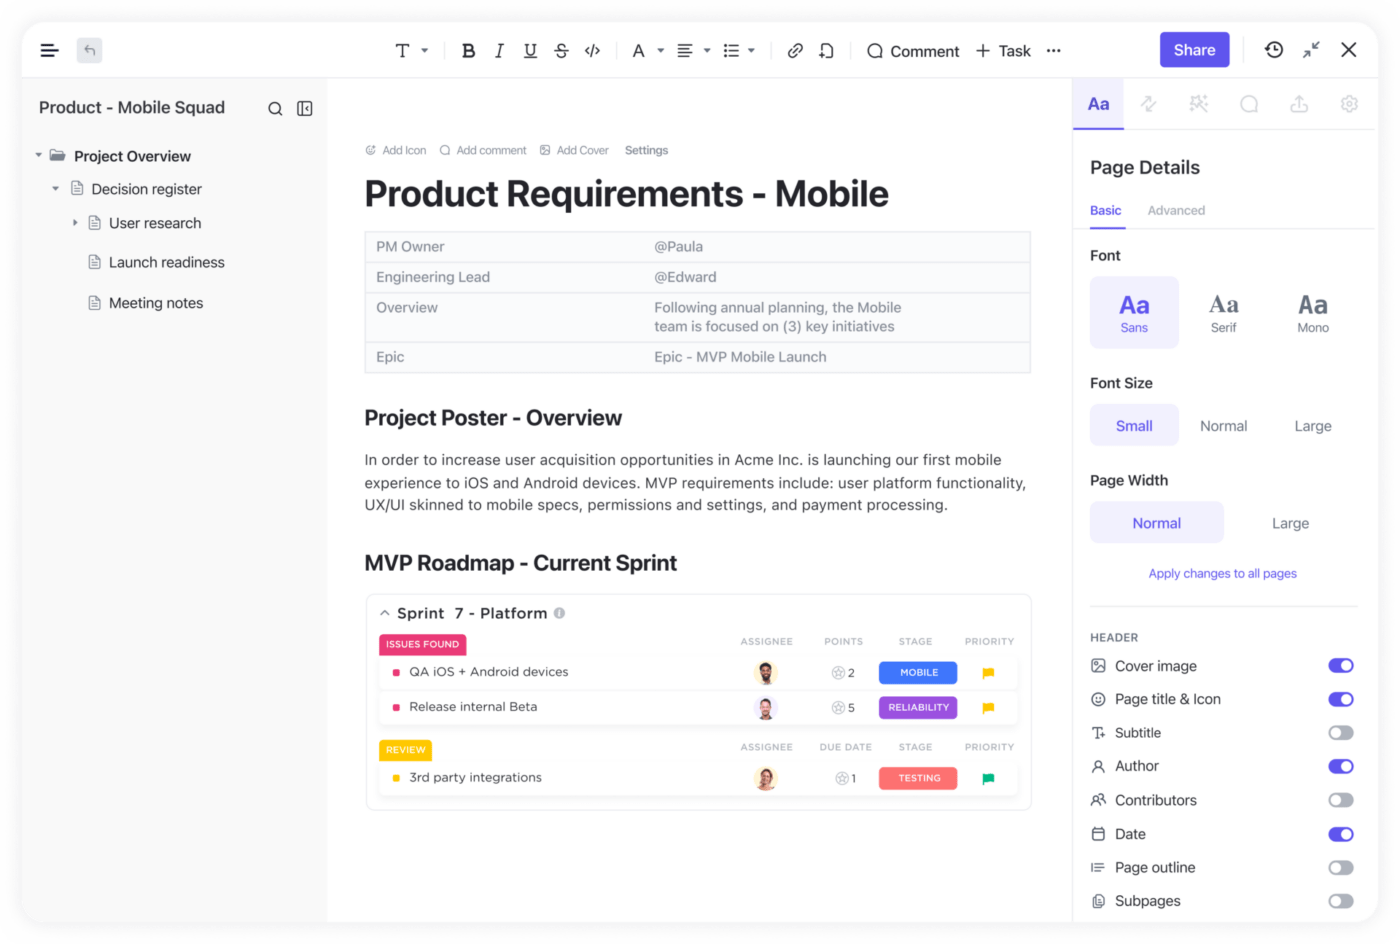 ClickUp Docs List View example of Product Requirements